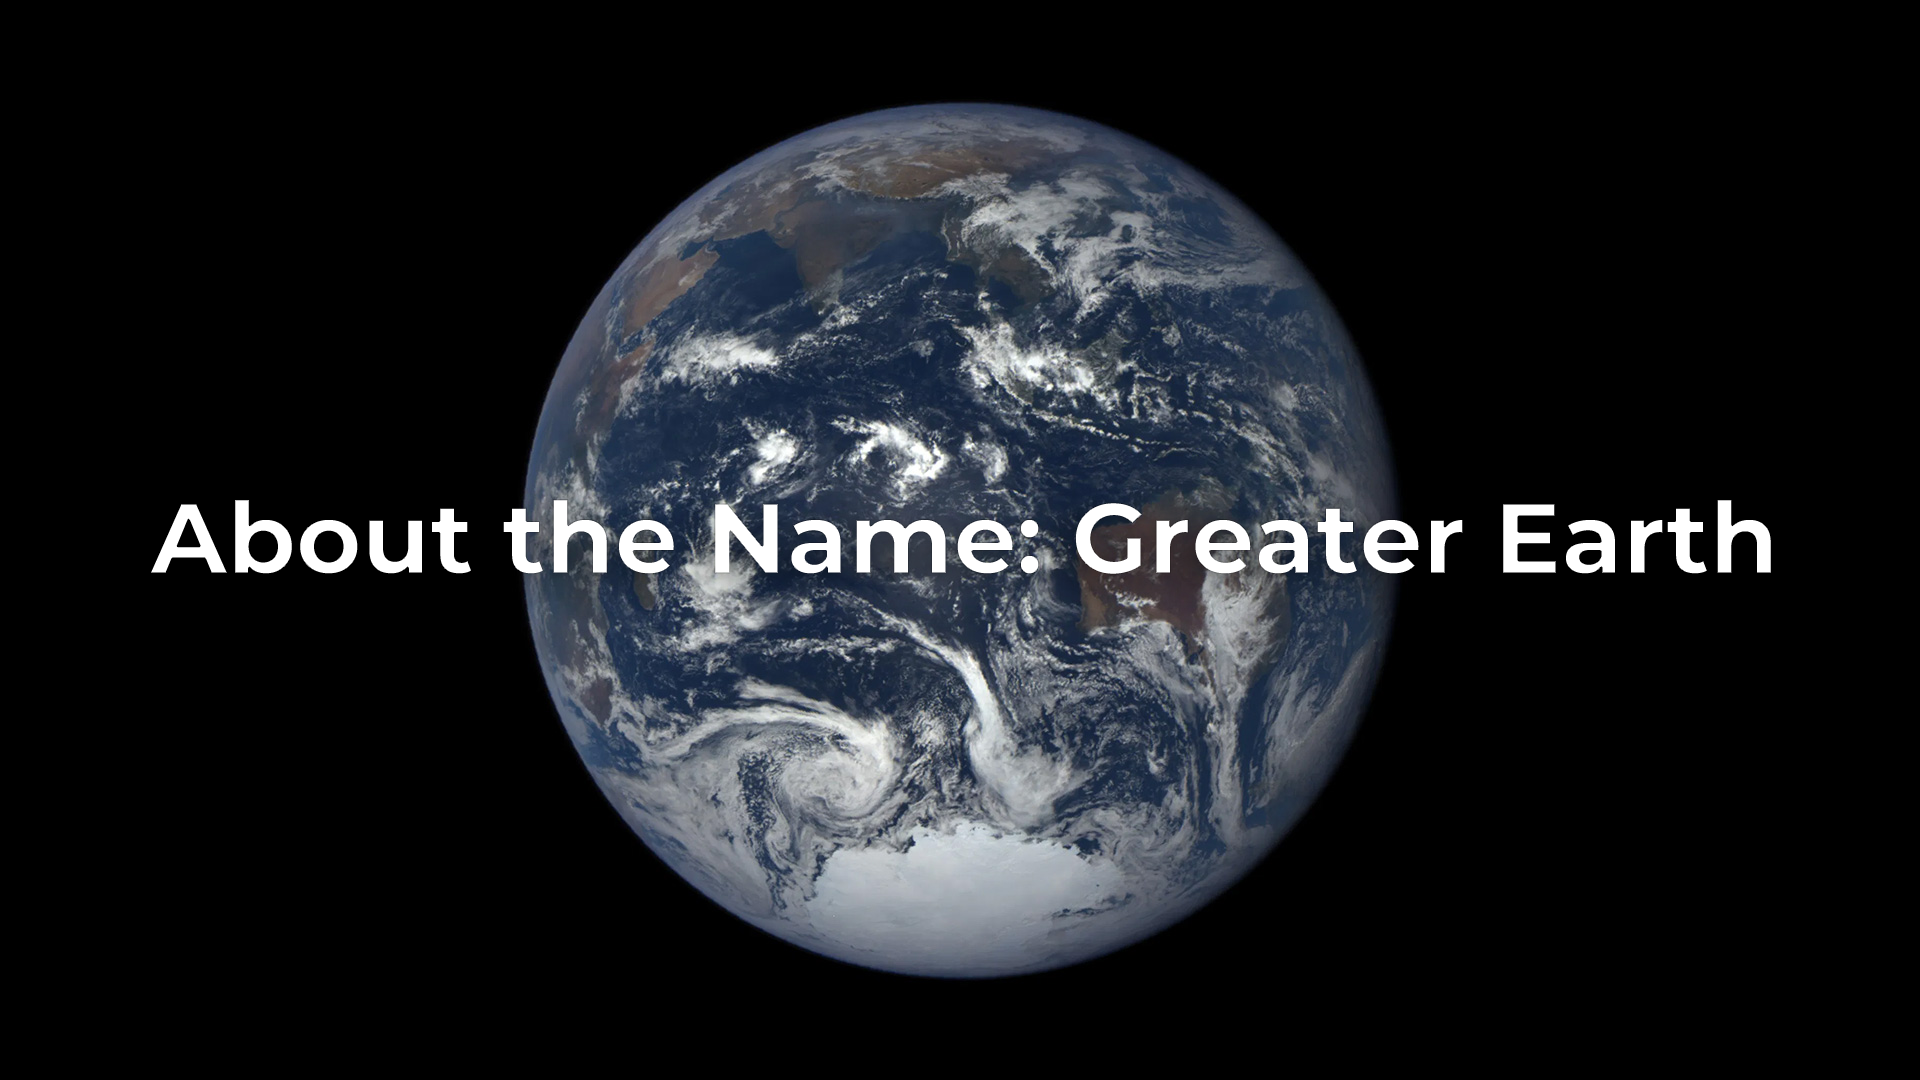 About the Name: Greater Earth